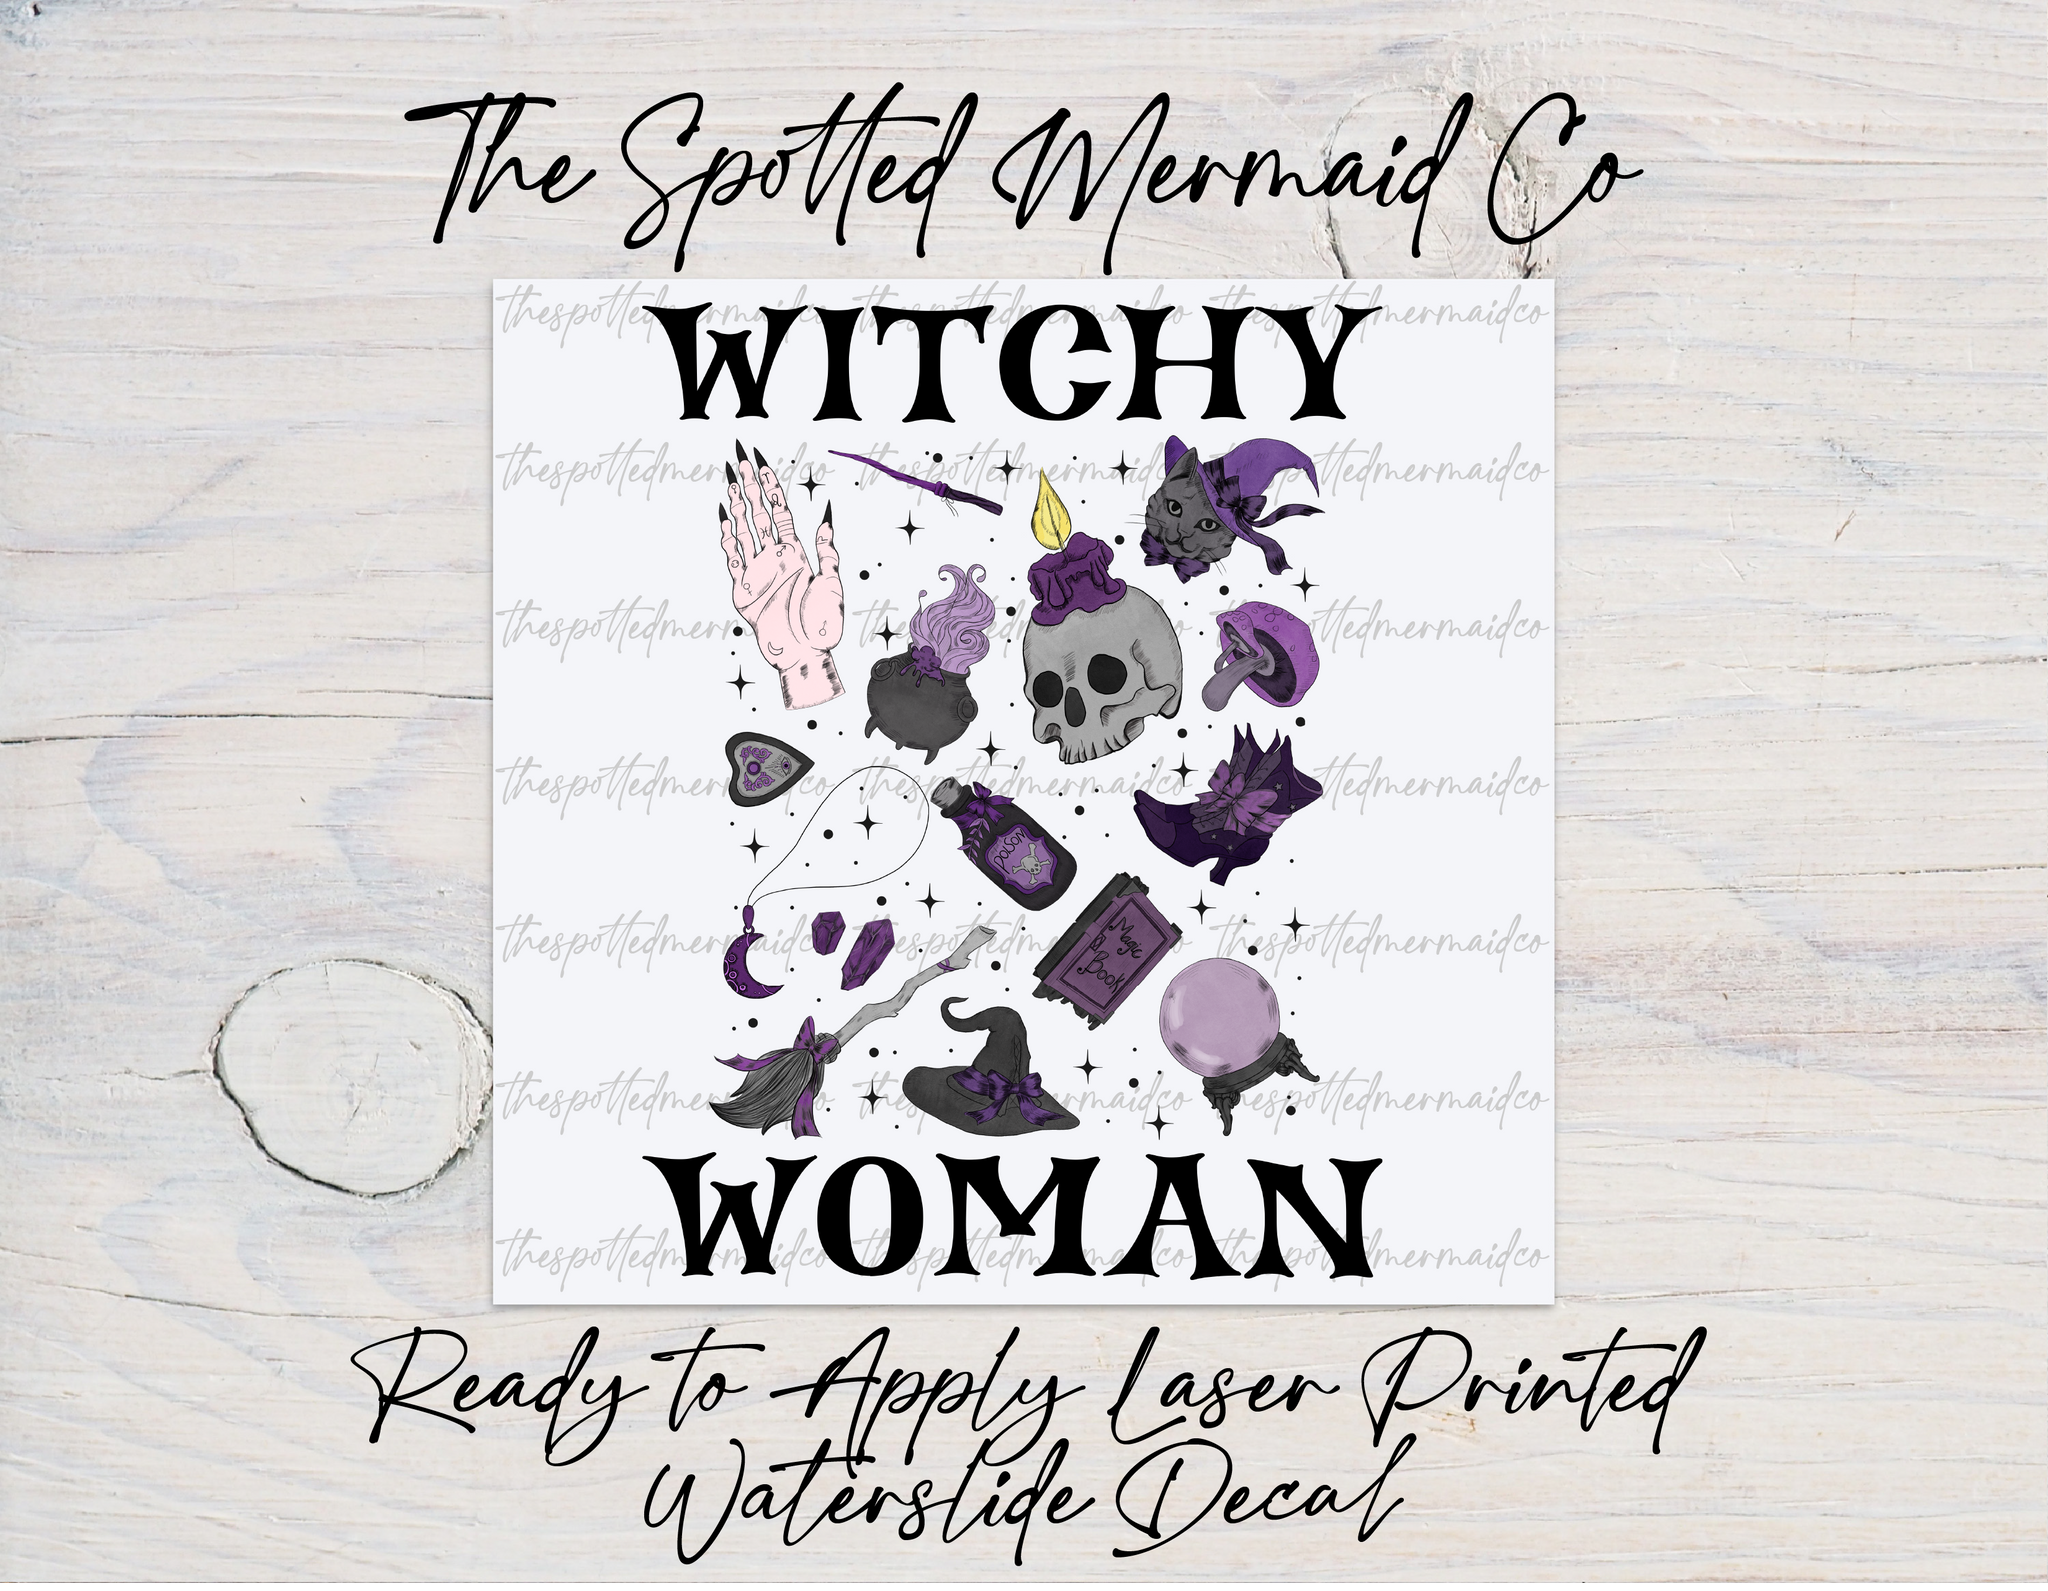 Witchy Woman Waterslide Decal